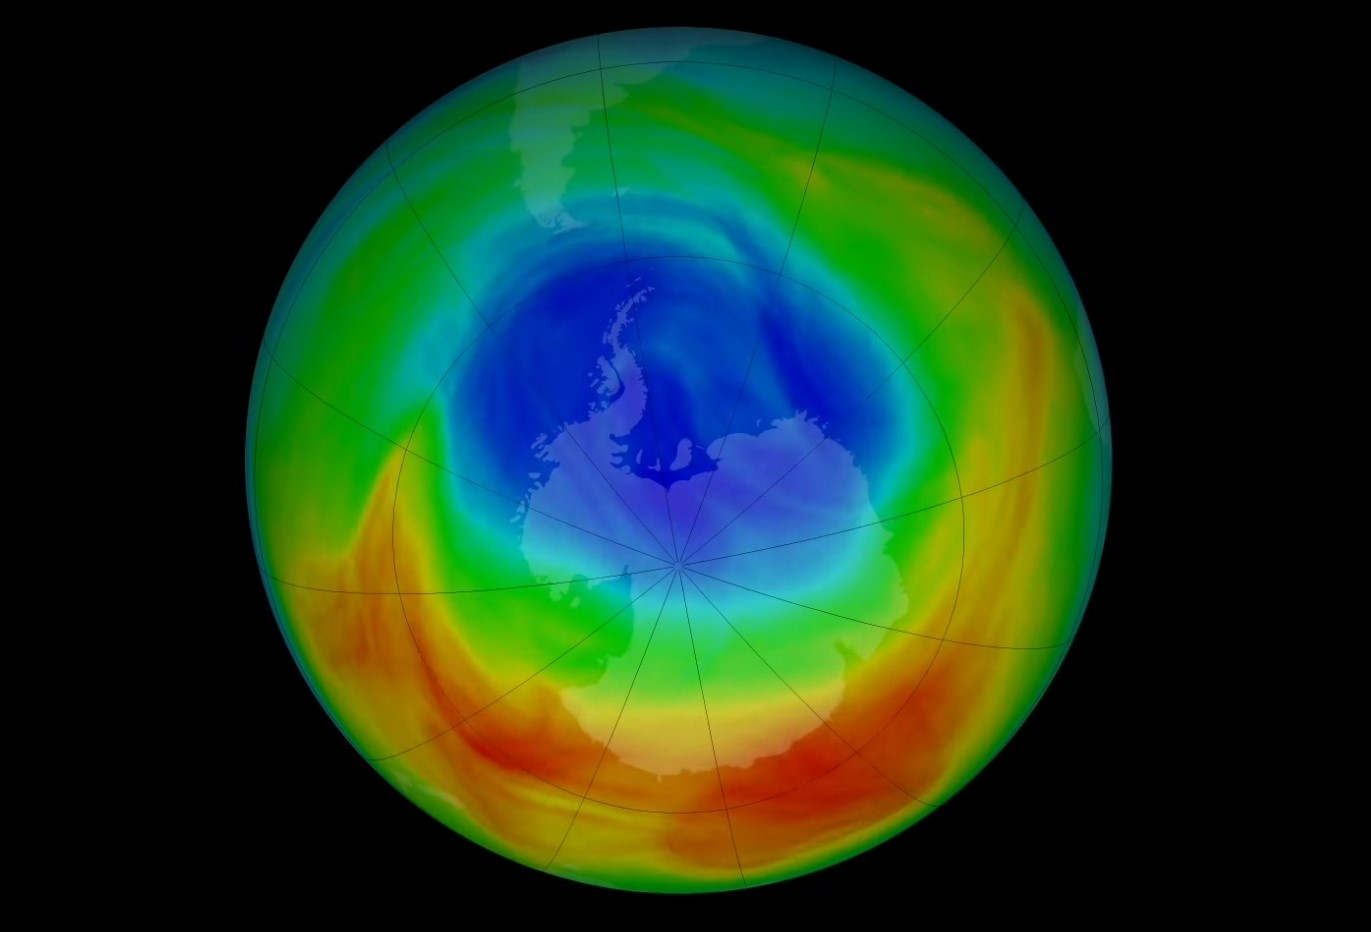 2019 Ozone Hole is the smallest since its Discovery